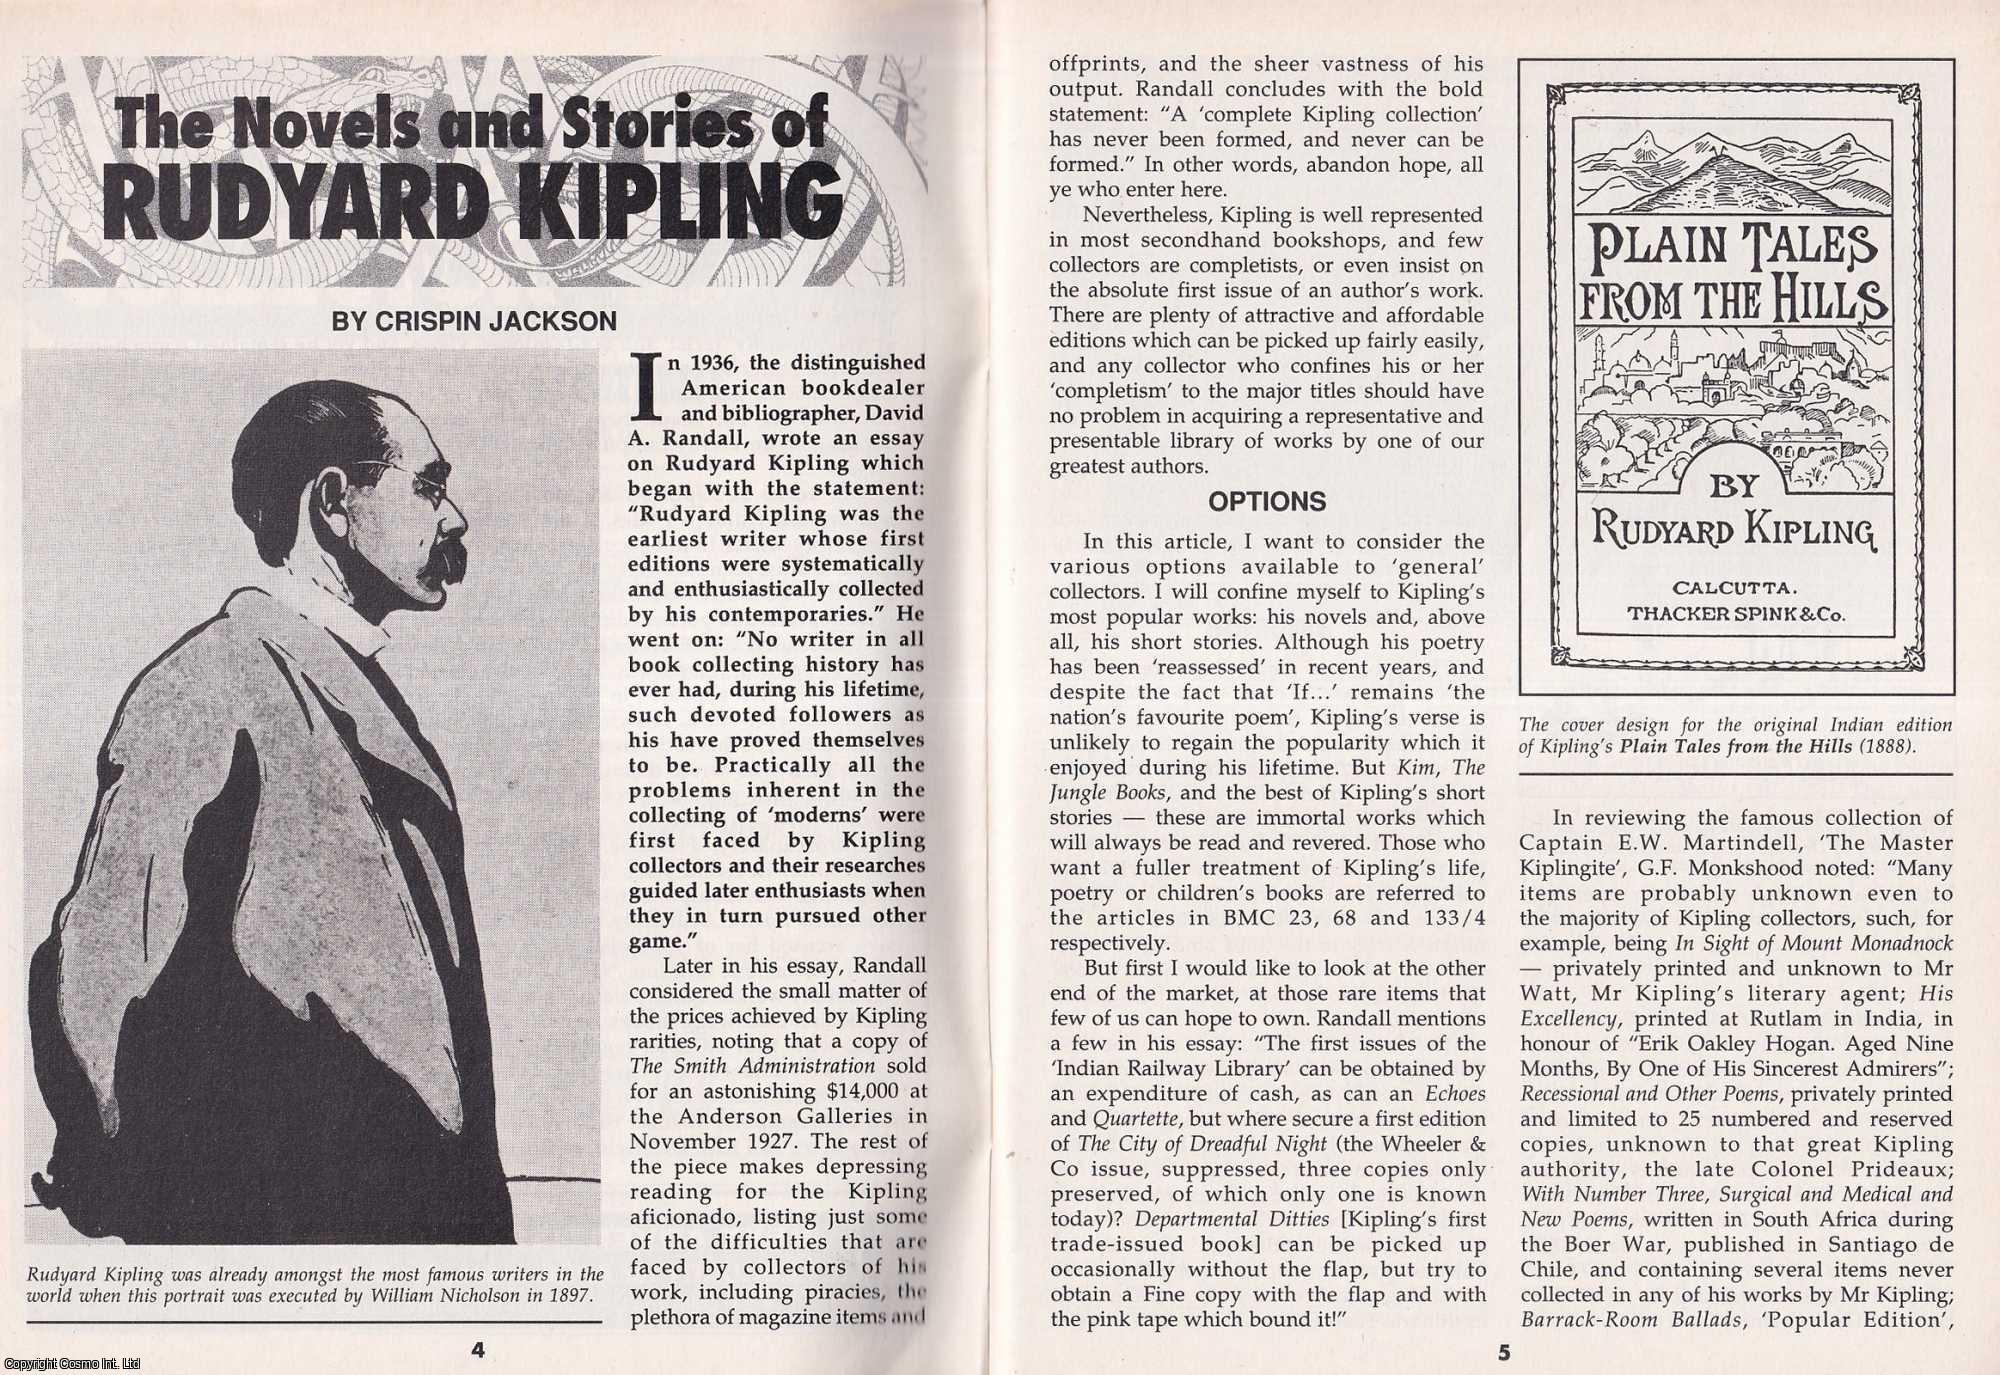 Crispin Jackson - The Novels and Stories of Rudyard Kipling. This is an original article separated from an issue of The Book & Magazine Collector publication.